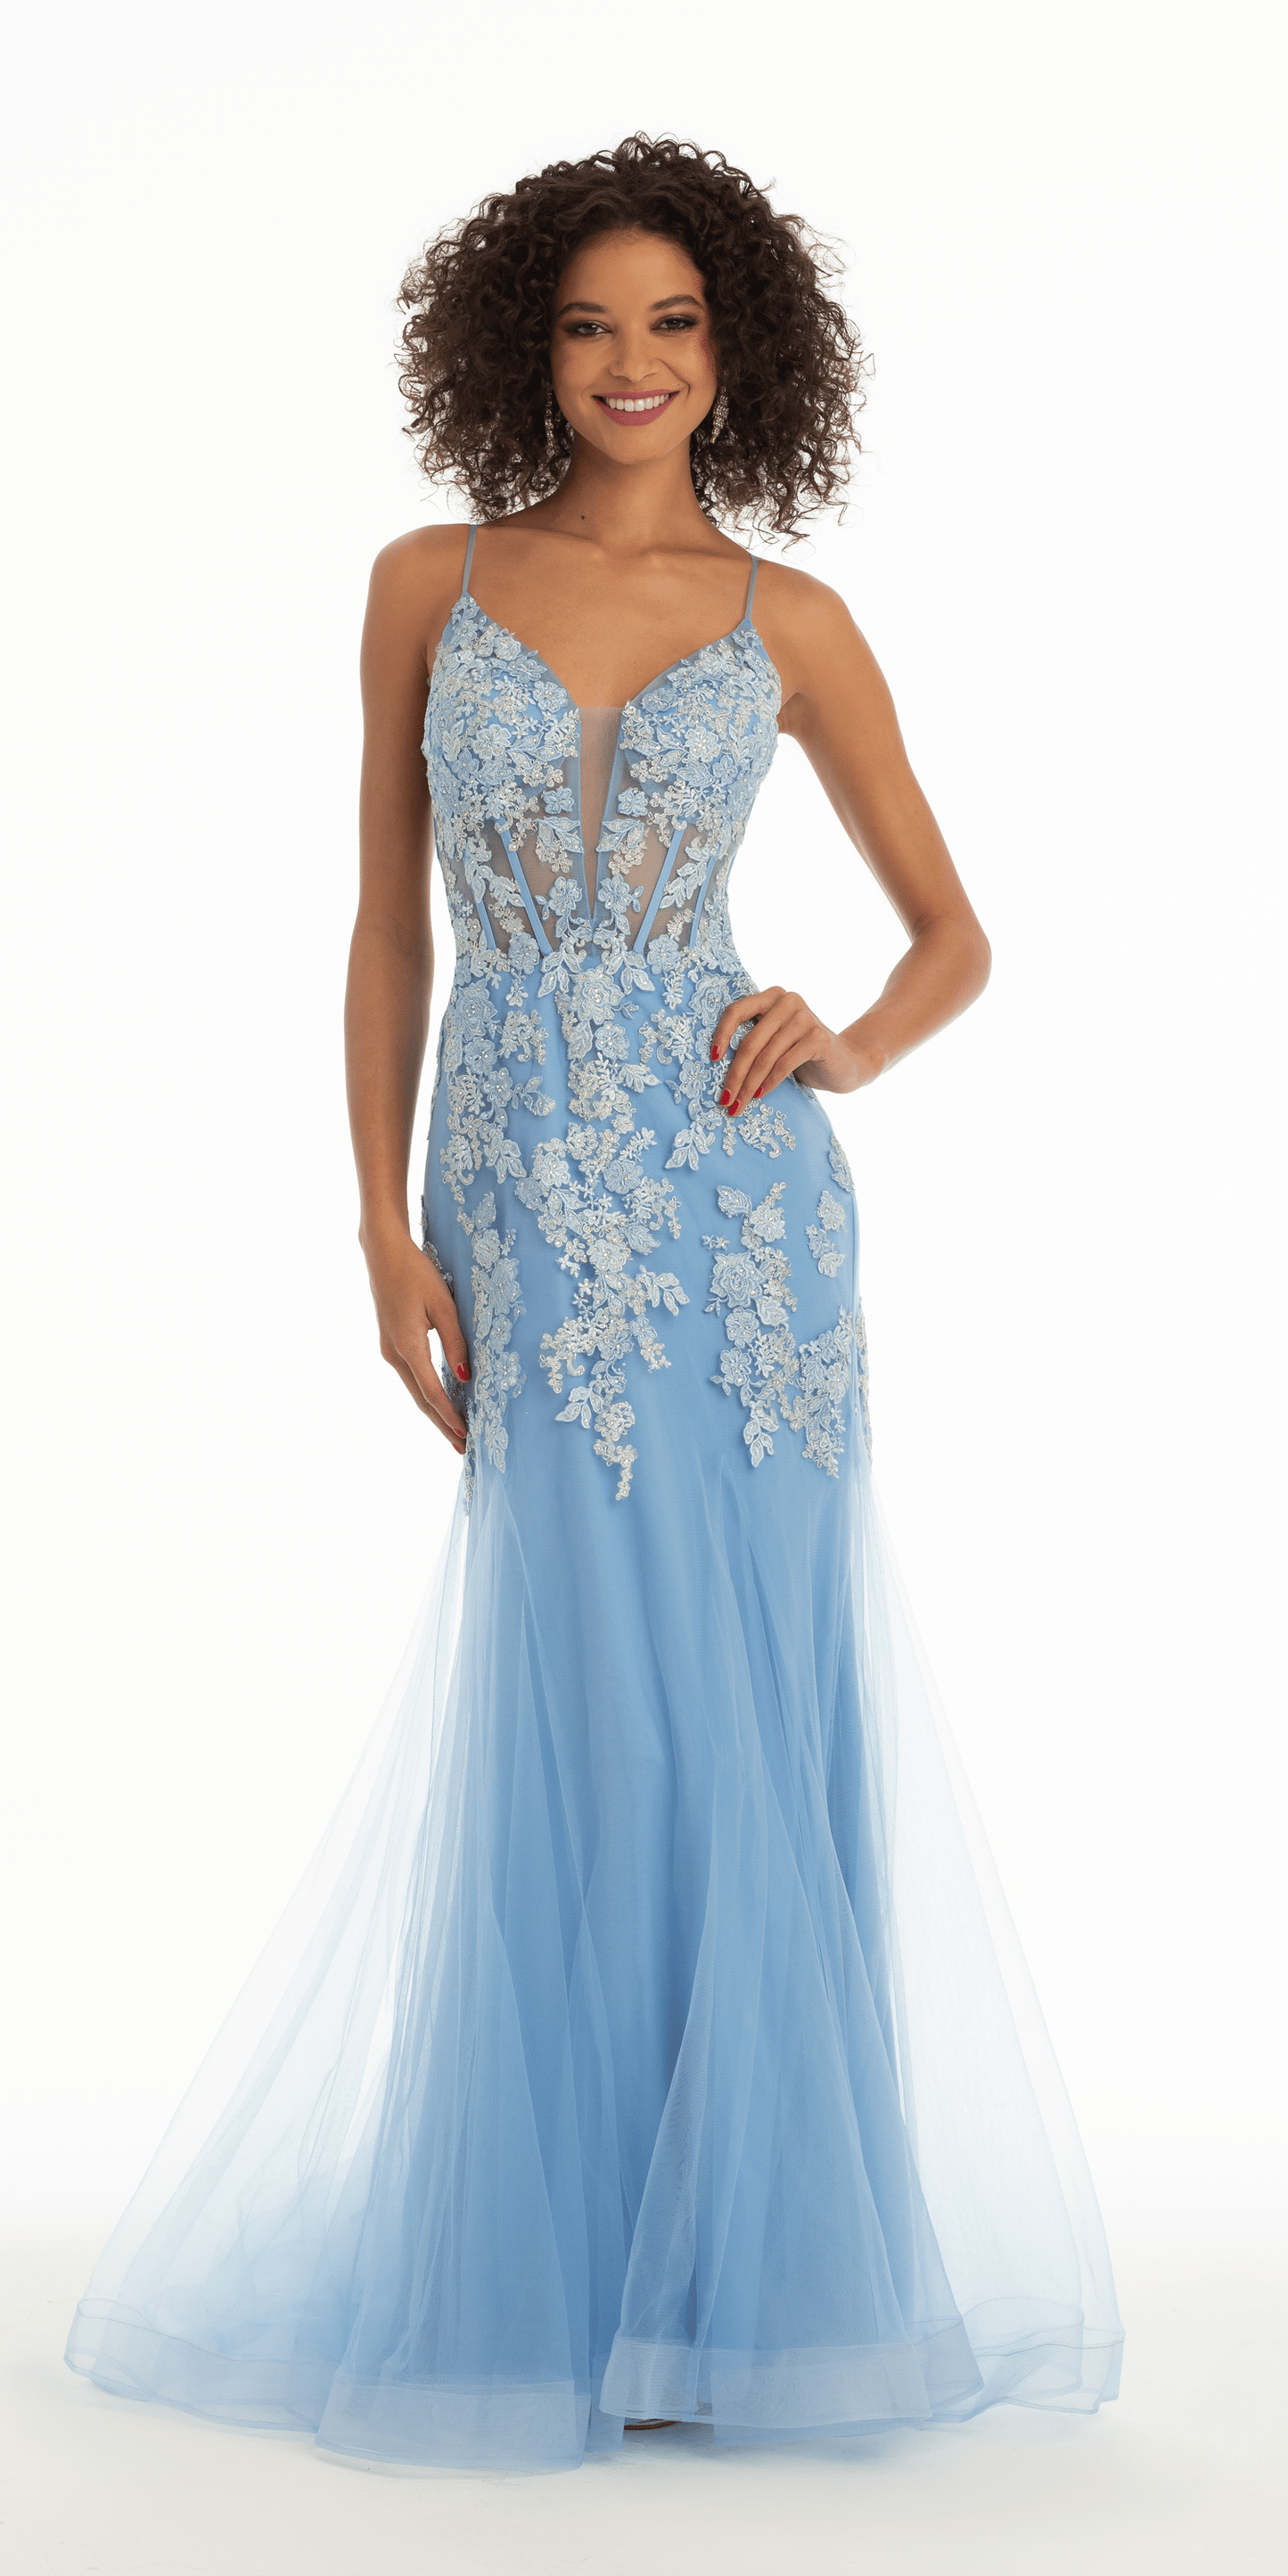 Camille La Vie Sweetheart Embroidered Mermaid Dress with Mesh Godets missy / 0 / french-blue